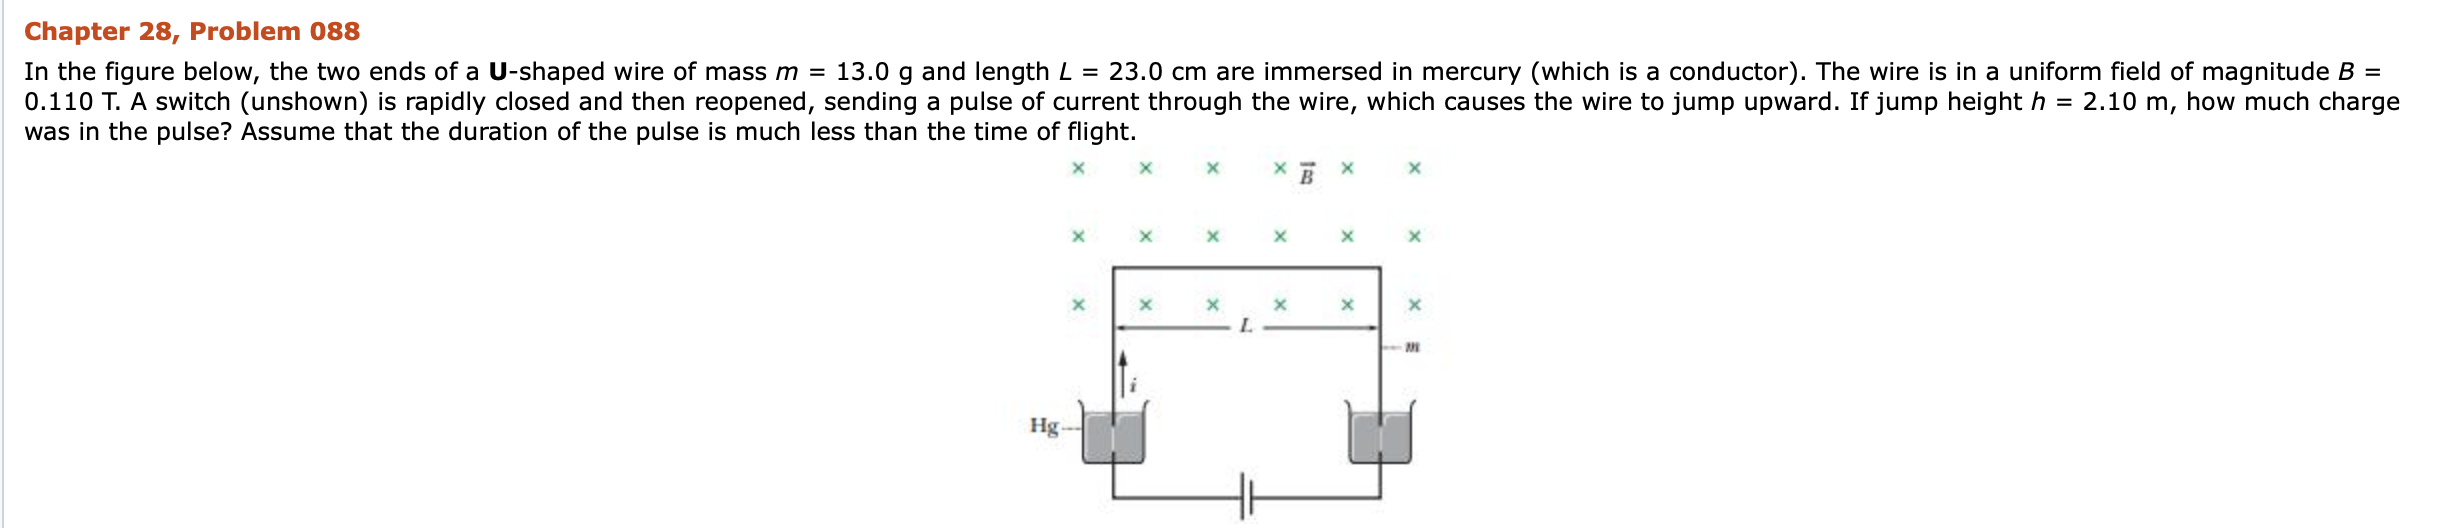 Chapter 28, Problem 088
In the figure below, the two ends of a U-shaped wire of mass m = 13.0 g and length L = 23.0 cm are immersed in mercury (which is a conductor). The wire is in a uniform field of magnitude B =
0.110 T. A switch (unshown) is rapidly closed and then reopened, sending a pulse of current through the wire, which causes the wire to jump upward. If jump height h = 2.10 m, how much charge
was in the pulse? Assume that the duration of the pulse is much less than the time of flight.
Hg -
